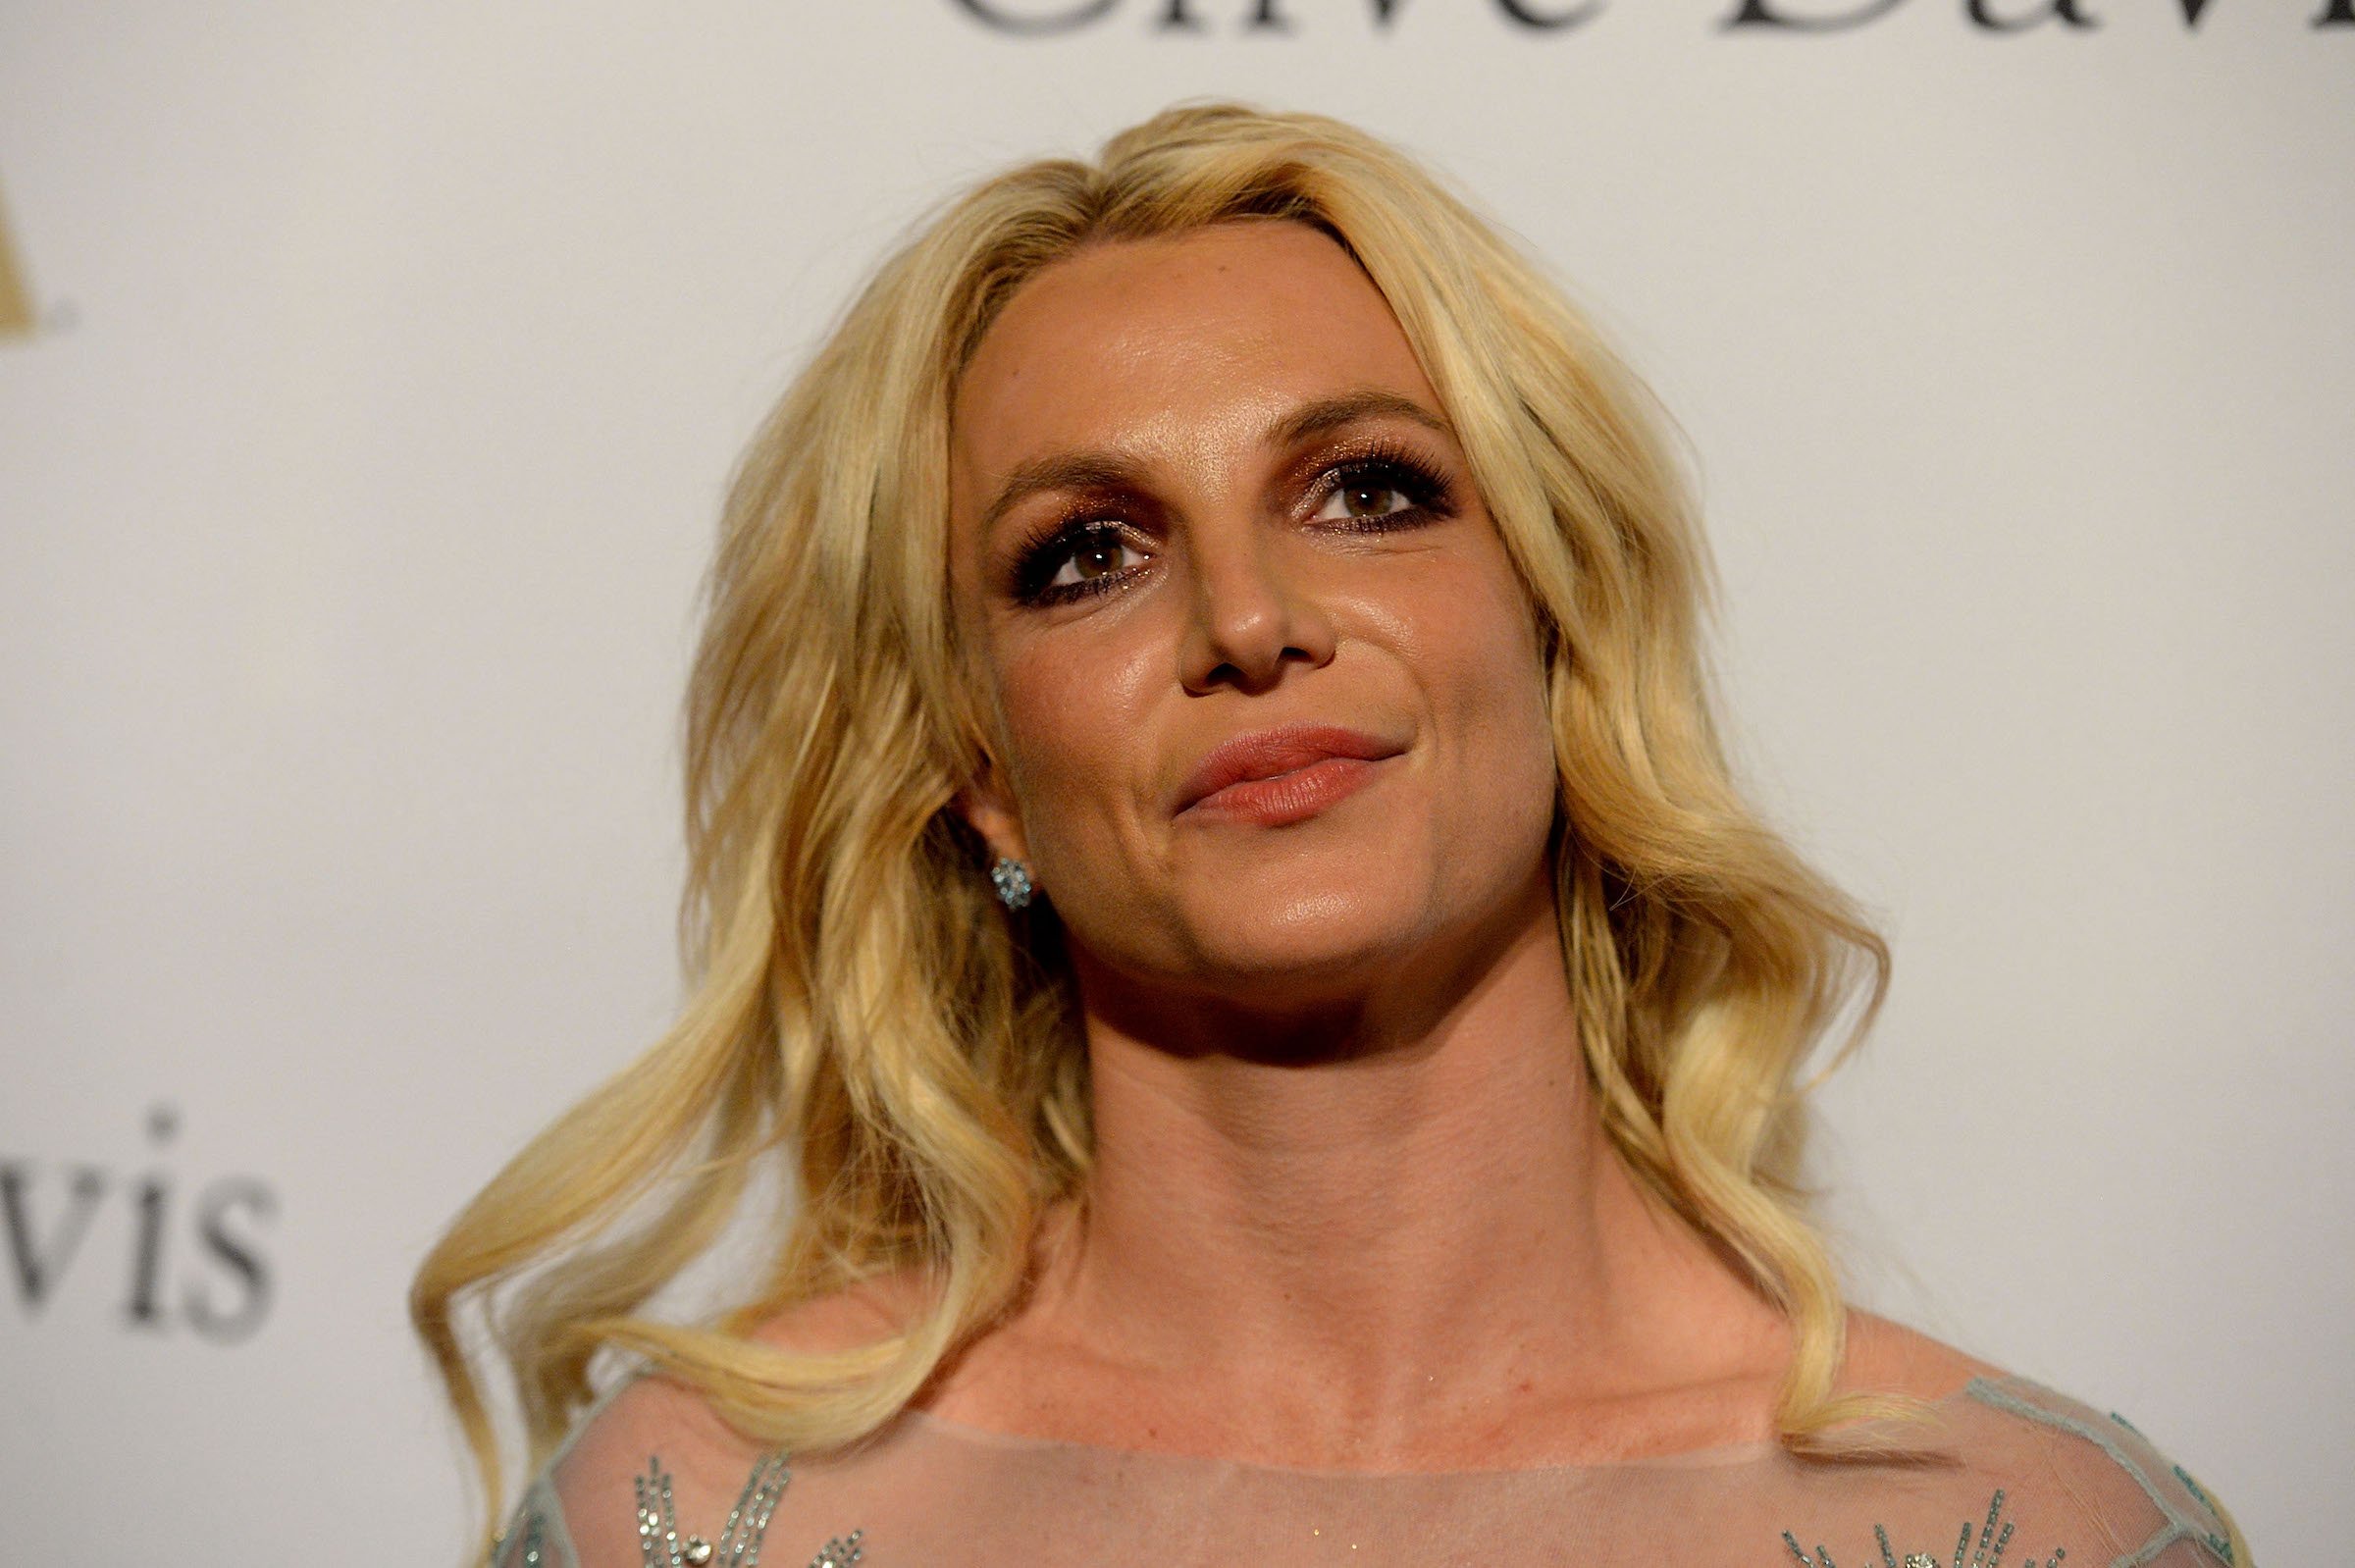 Britney Spears, who turned down an Oprah Winfrey interview, smiling for a photo